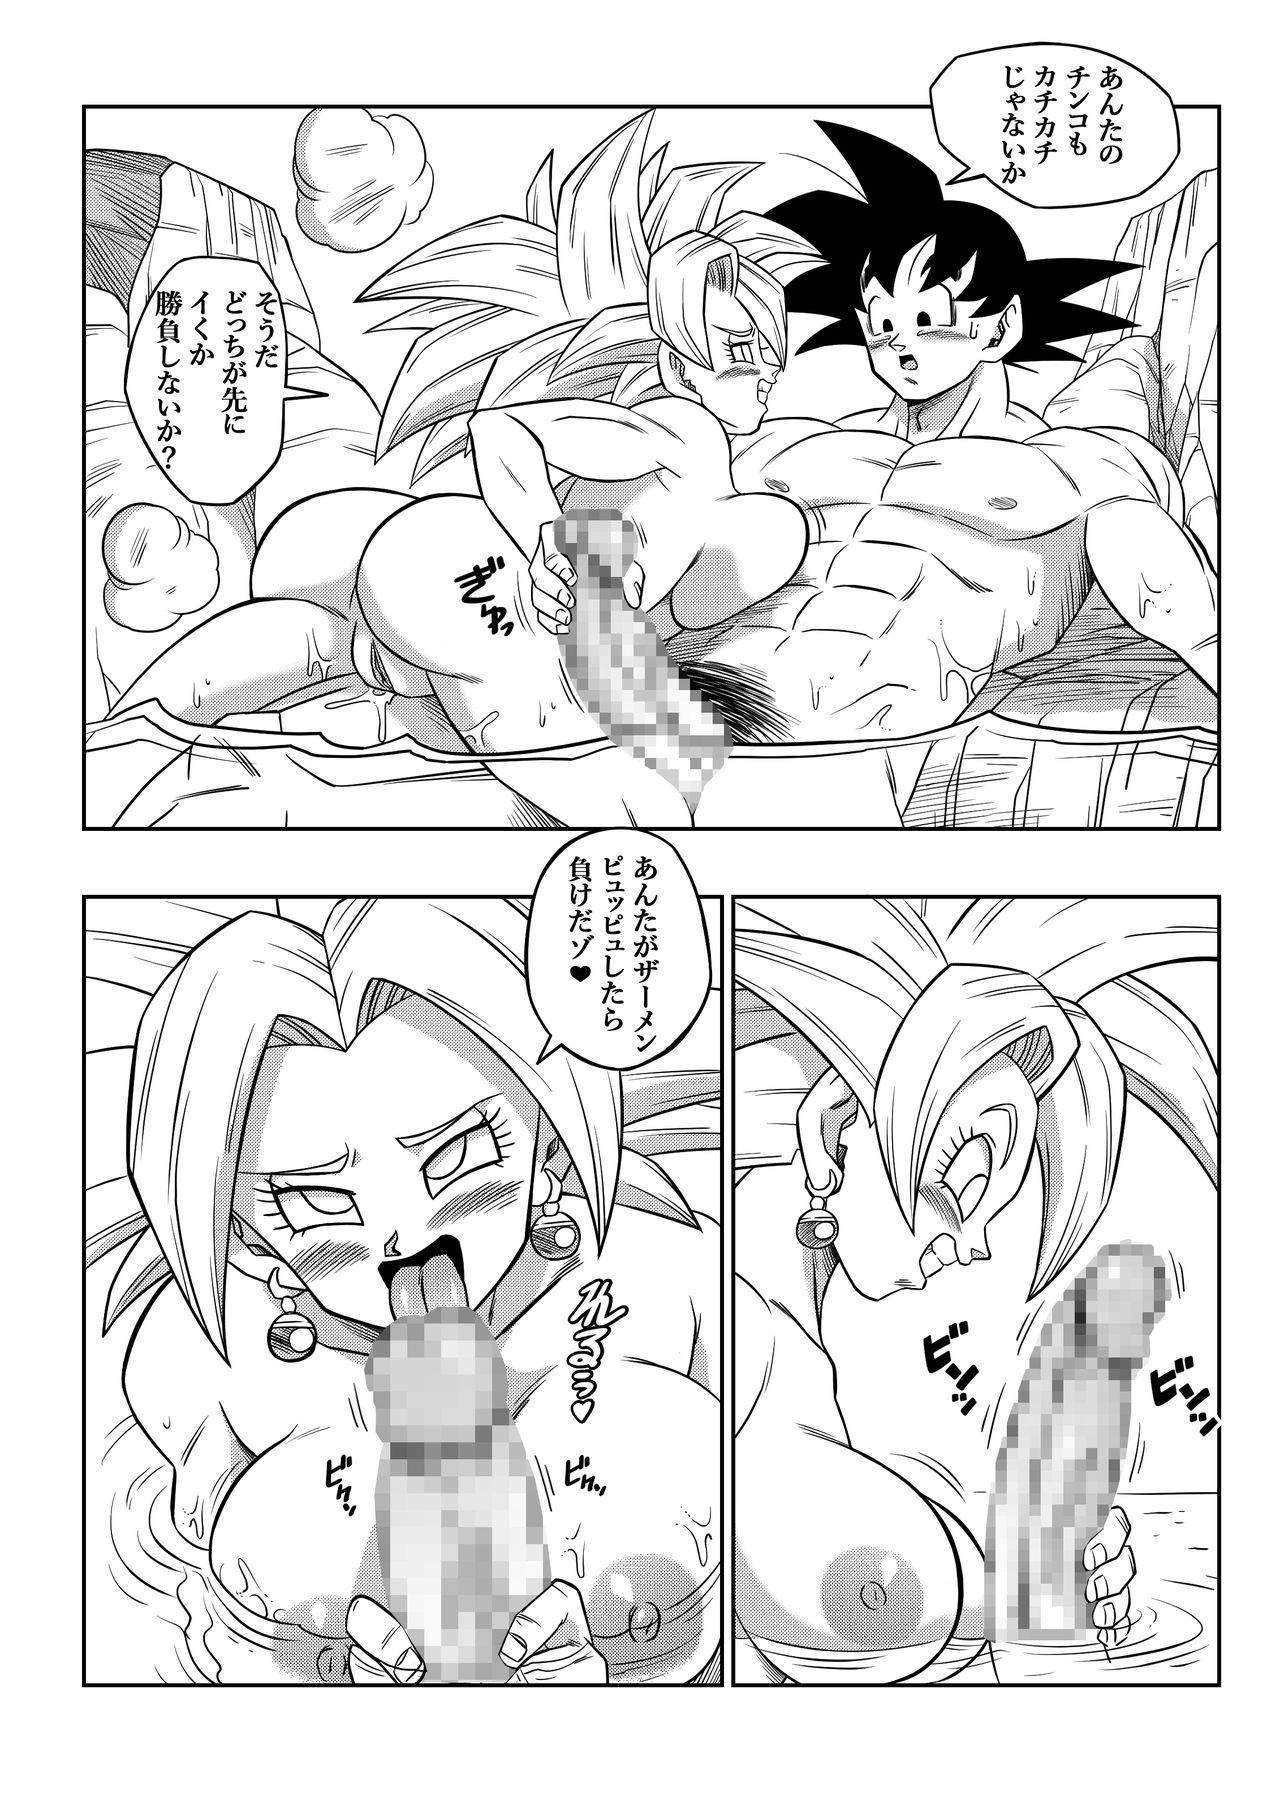 Whores Fight in the 6th Universe!!! - Dragon ball super Gay Pawnshop - Page 11